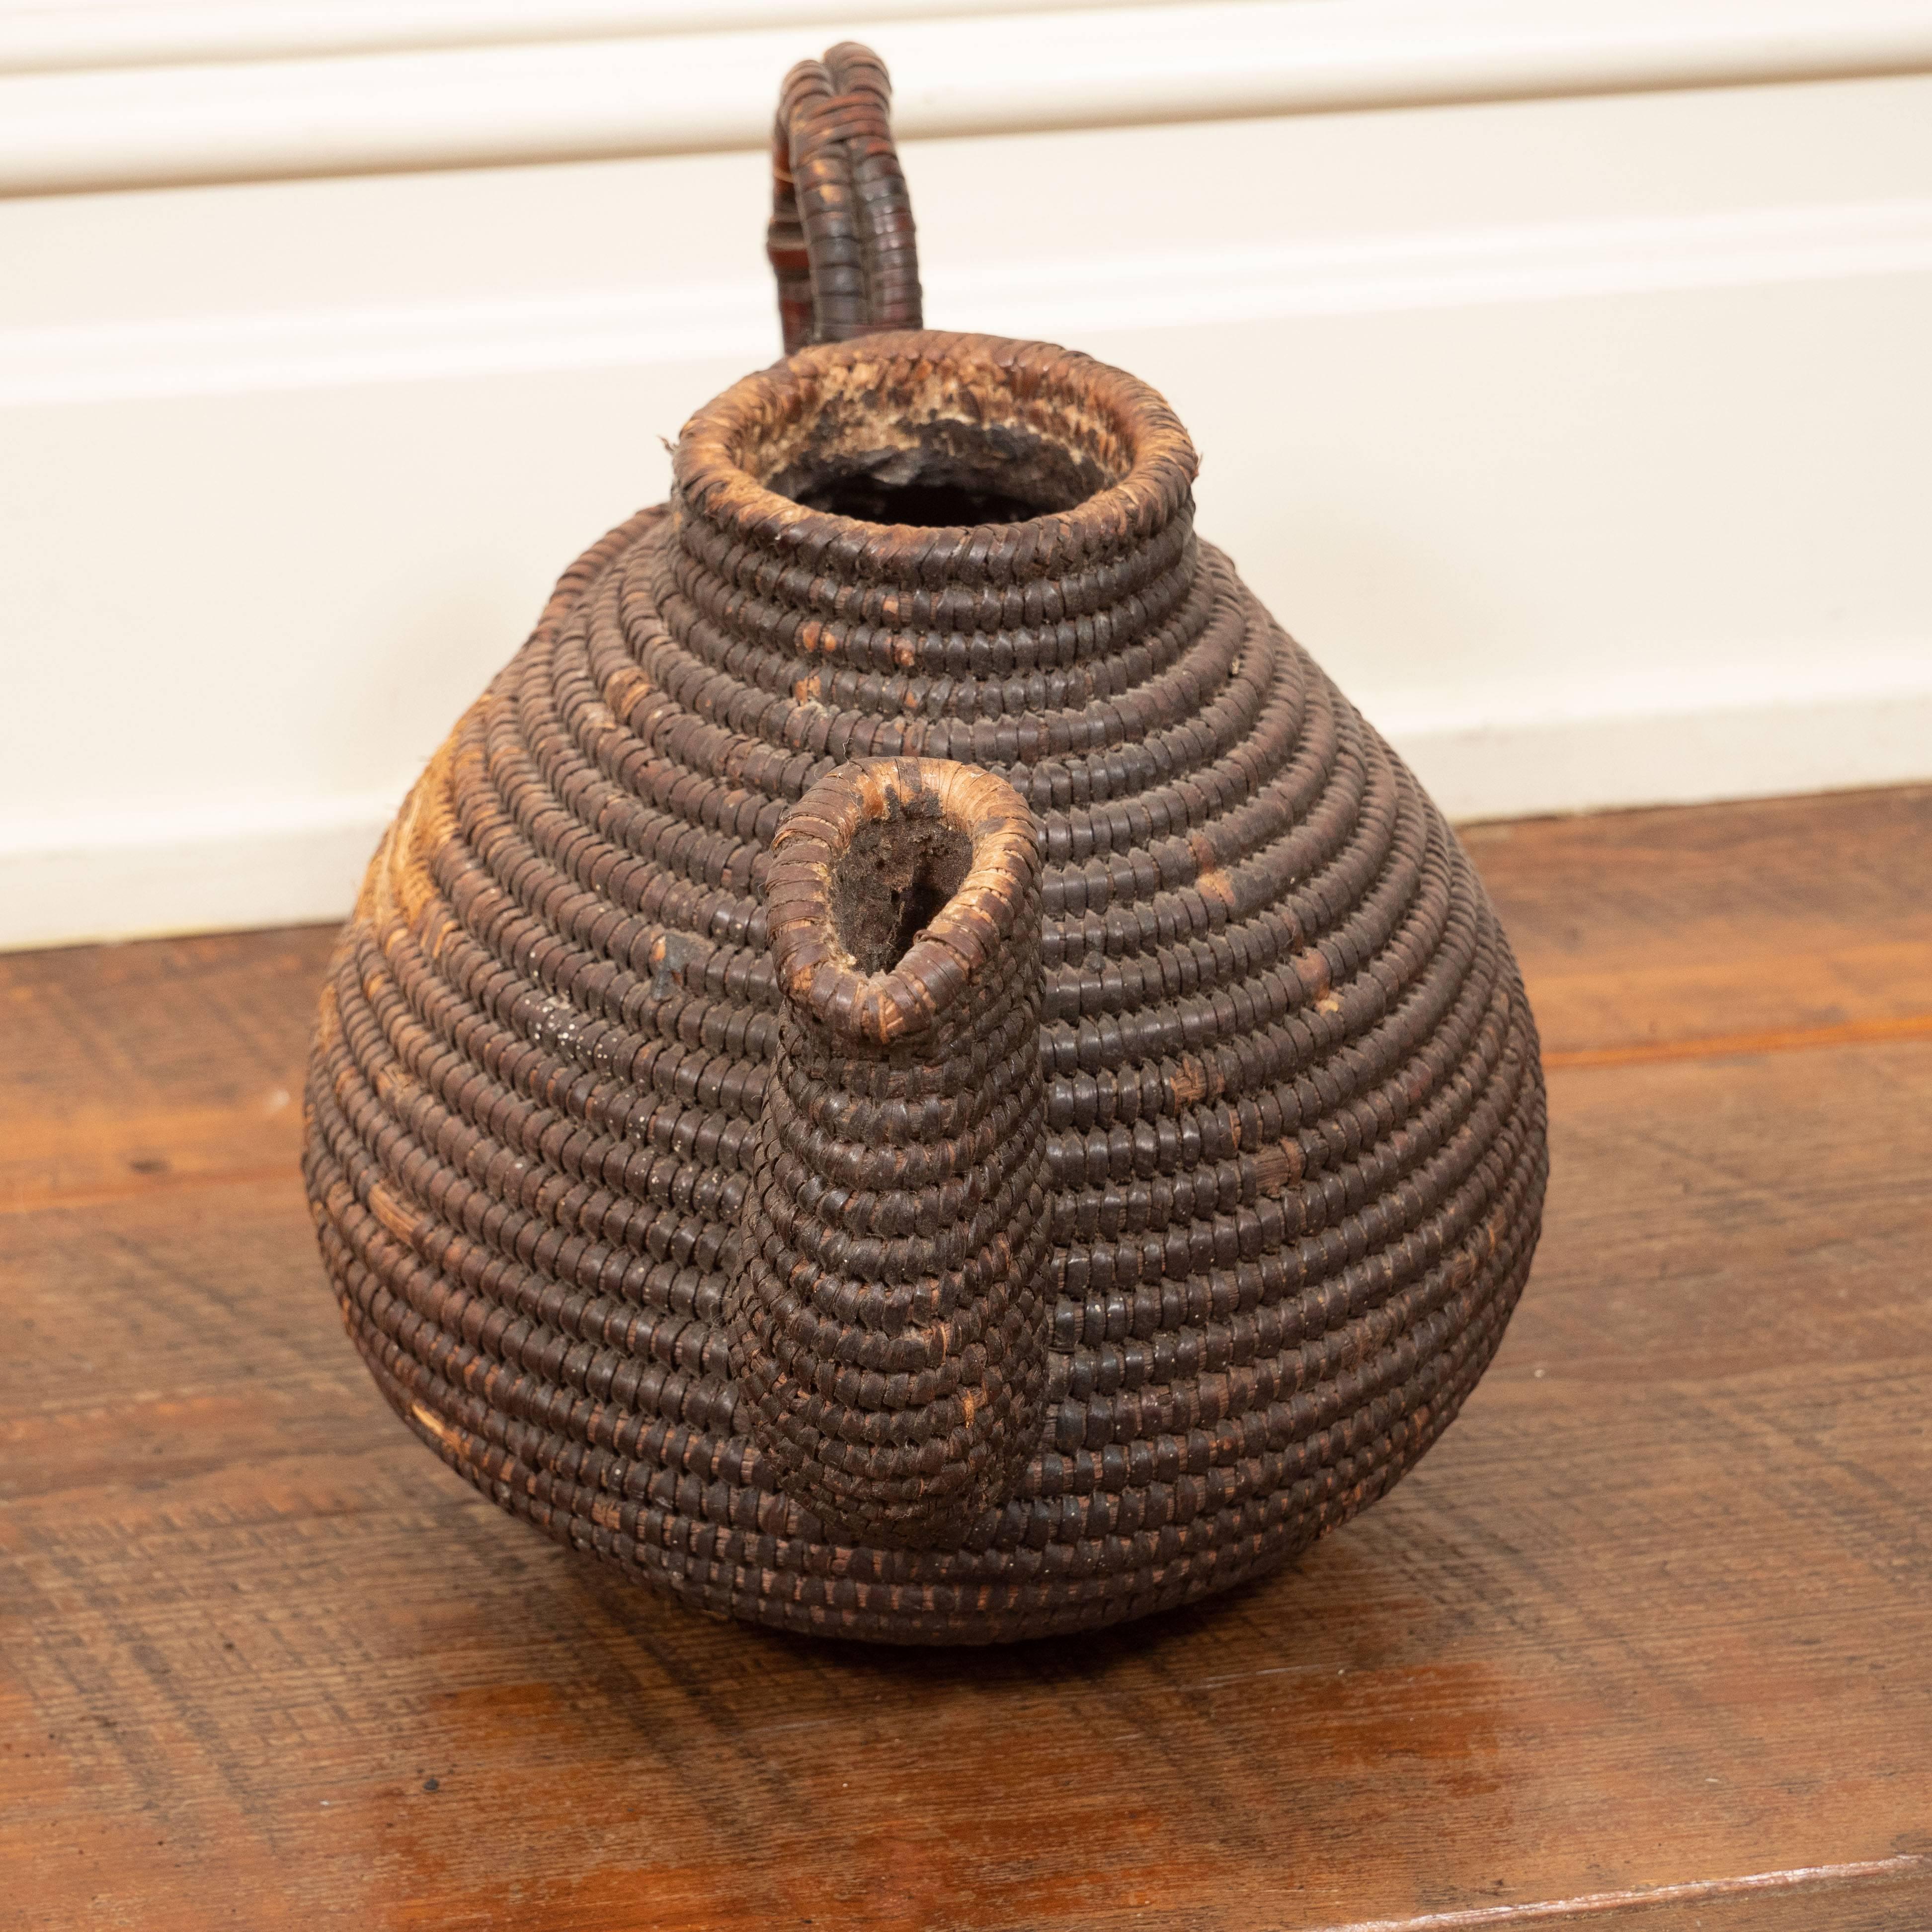 19th Century Woven Tea Basket, probably African 1